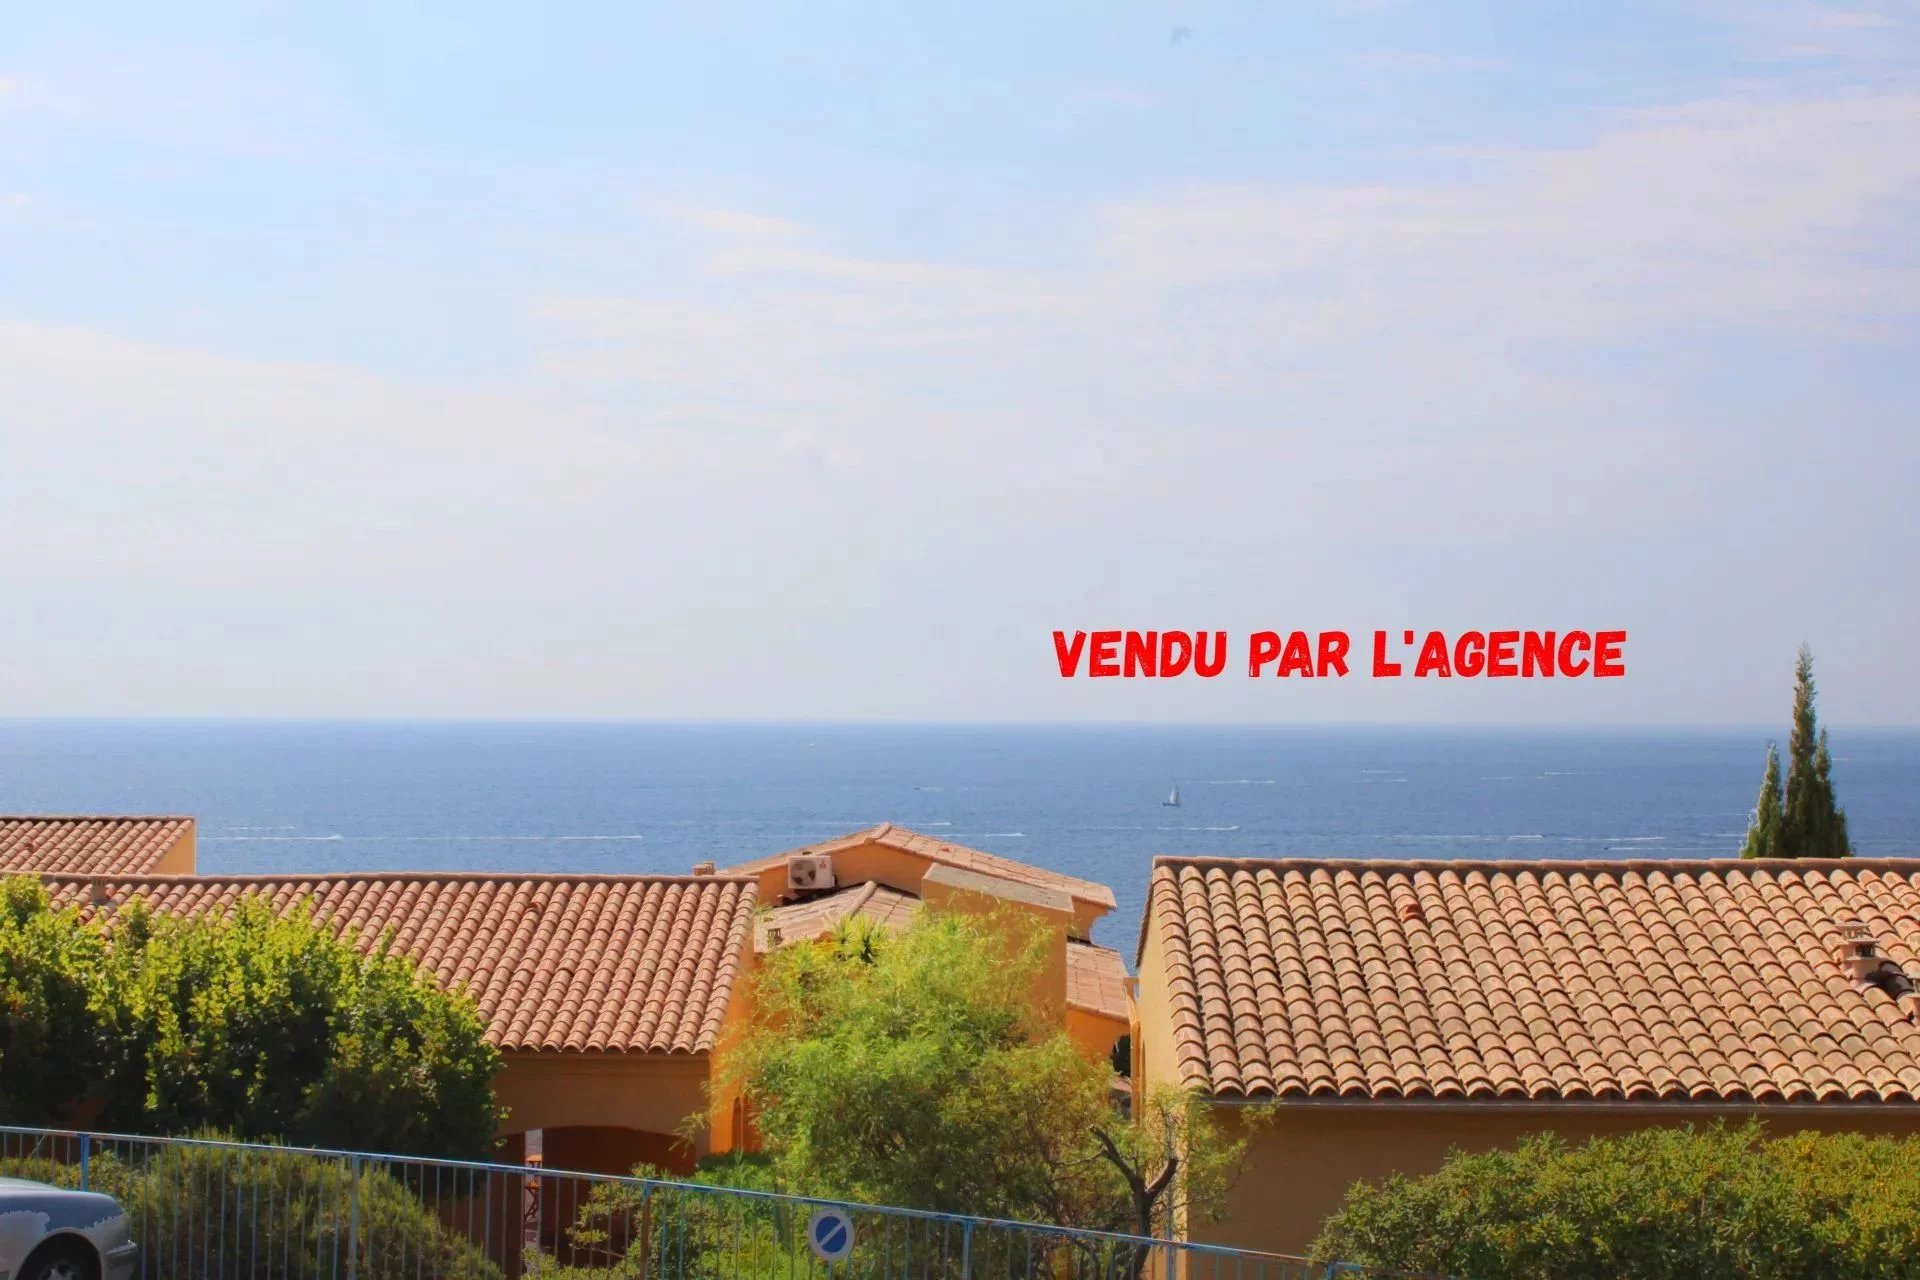 =n the slope of the Esterel and near the port and the beach :